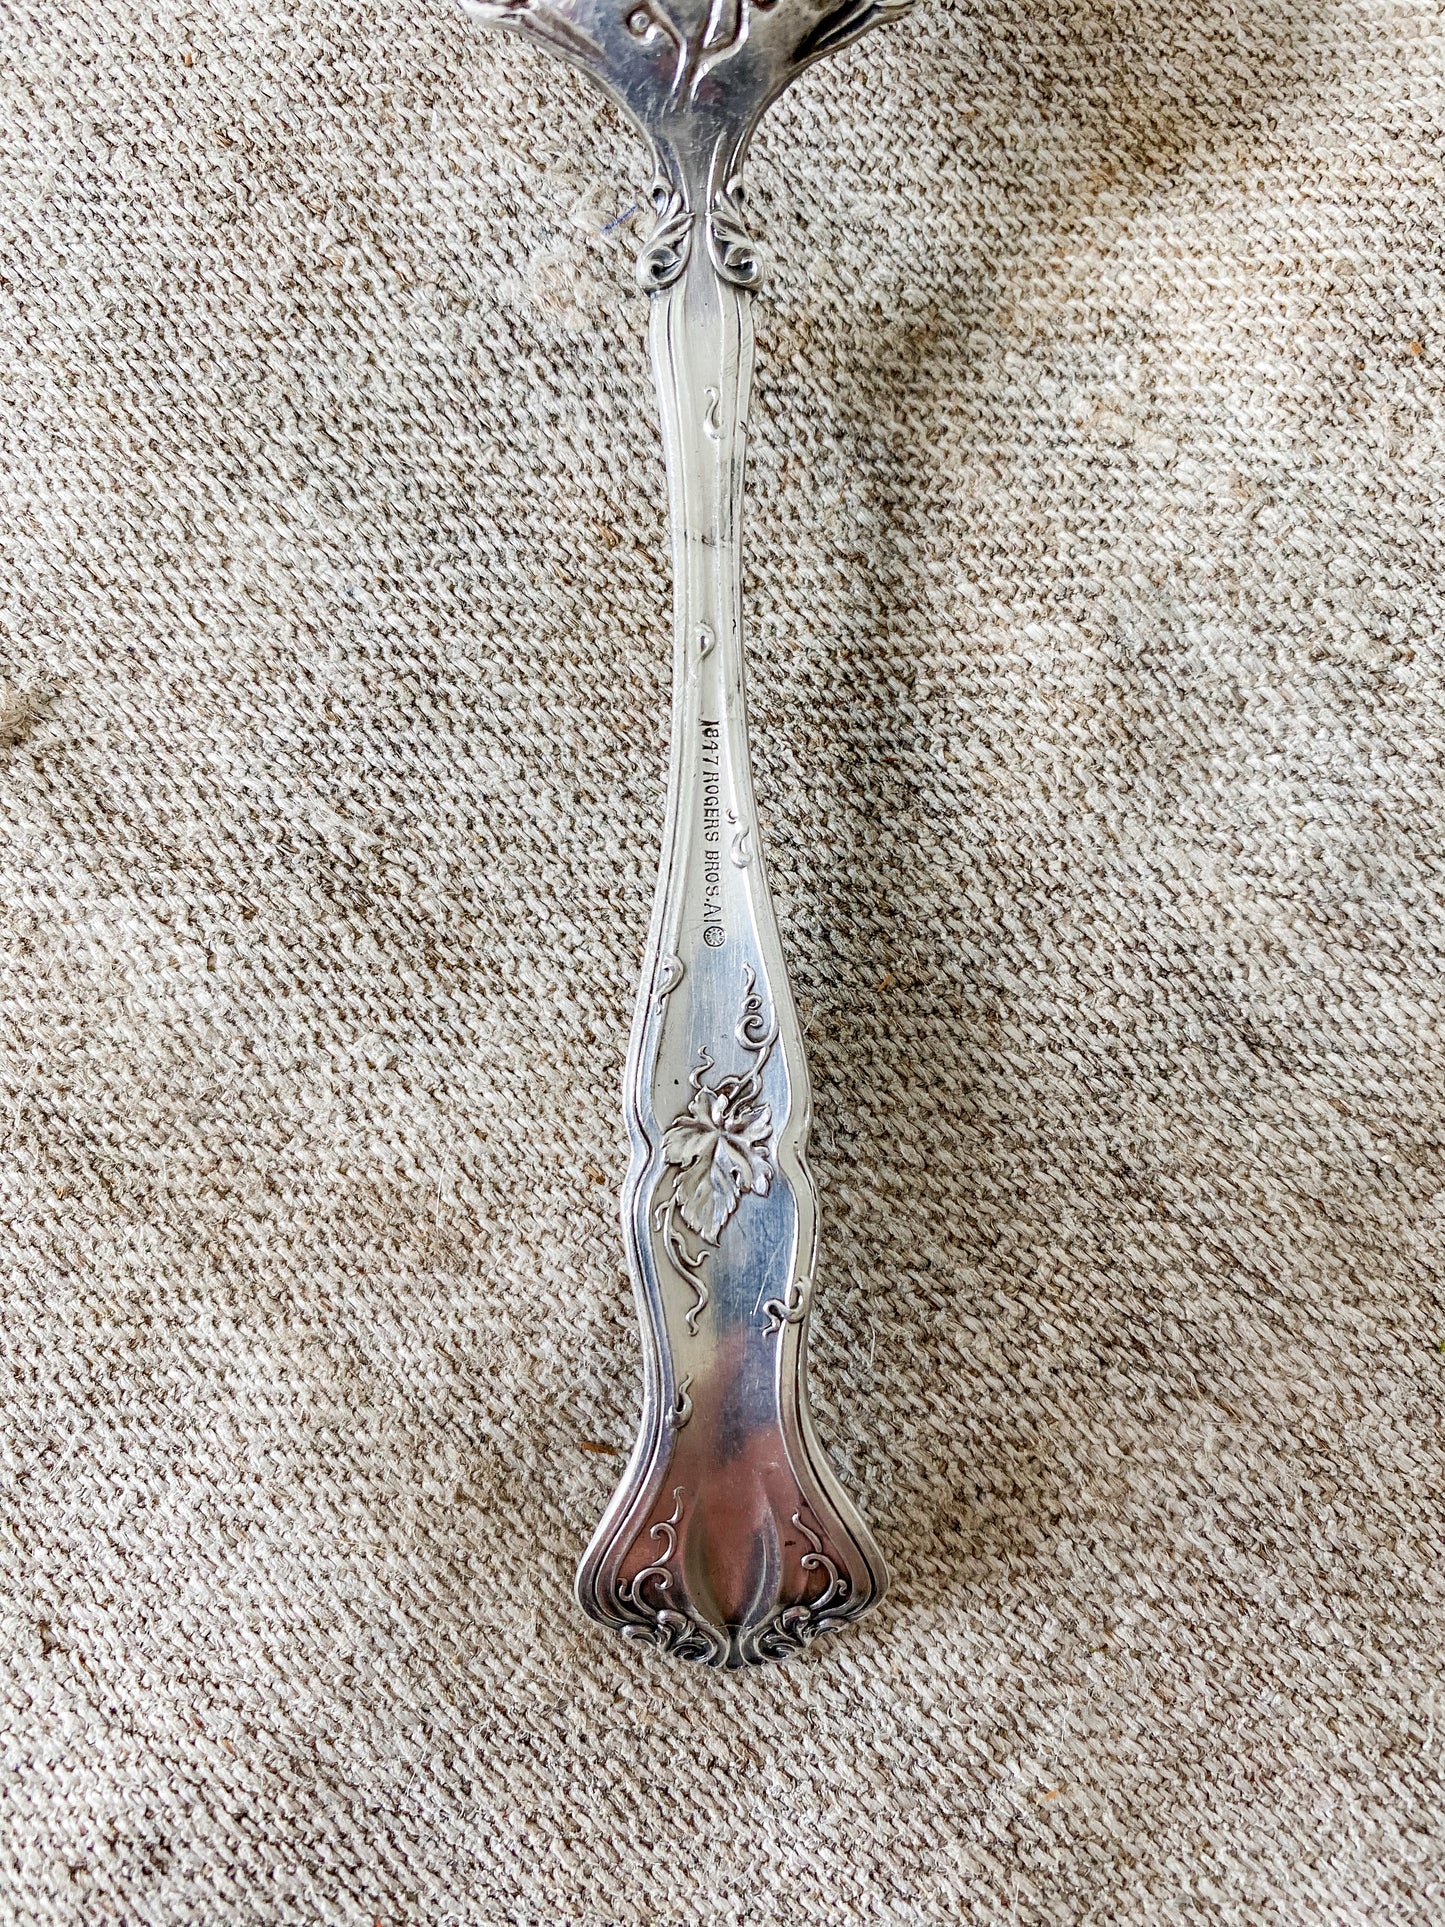 Antique Silver Plate Cake Fork by International Silver, c1904